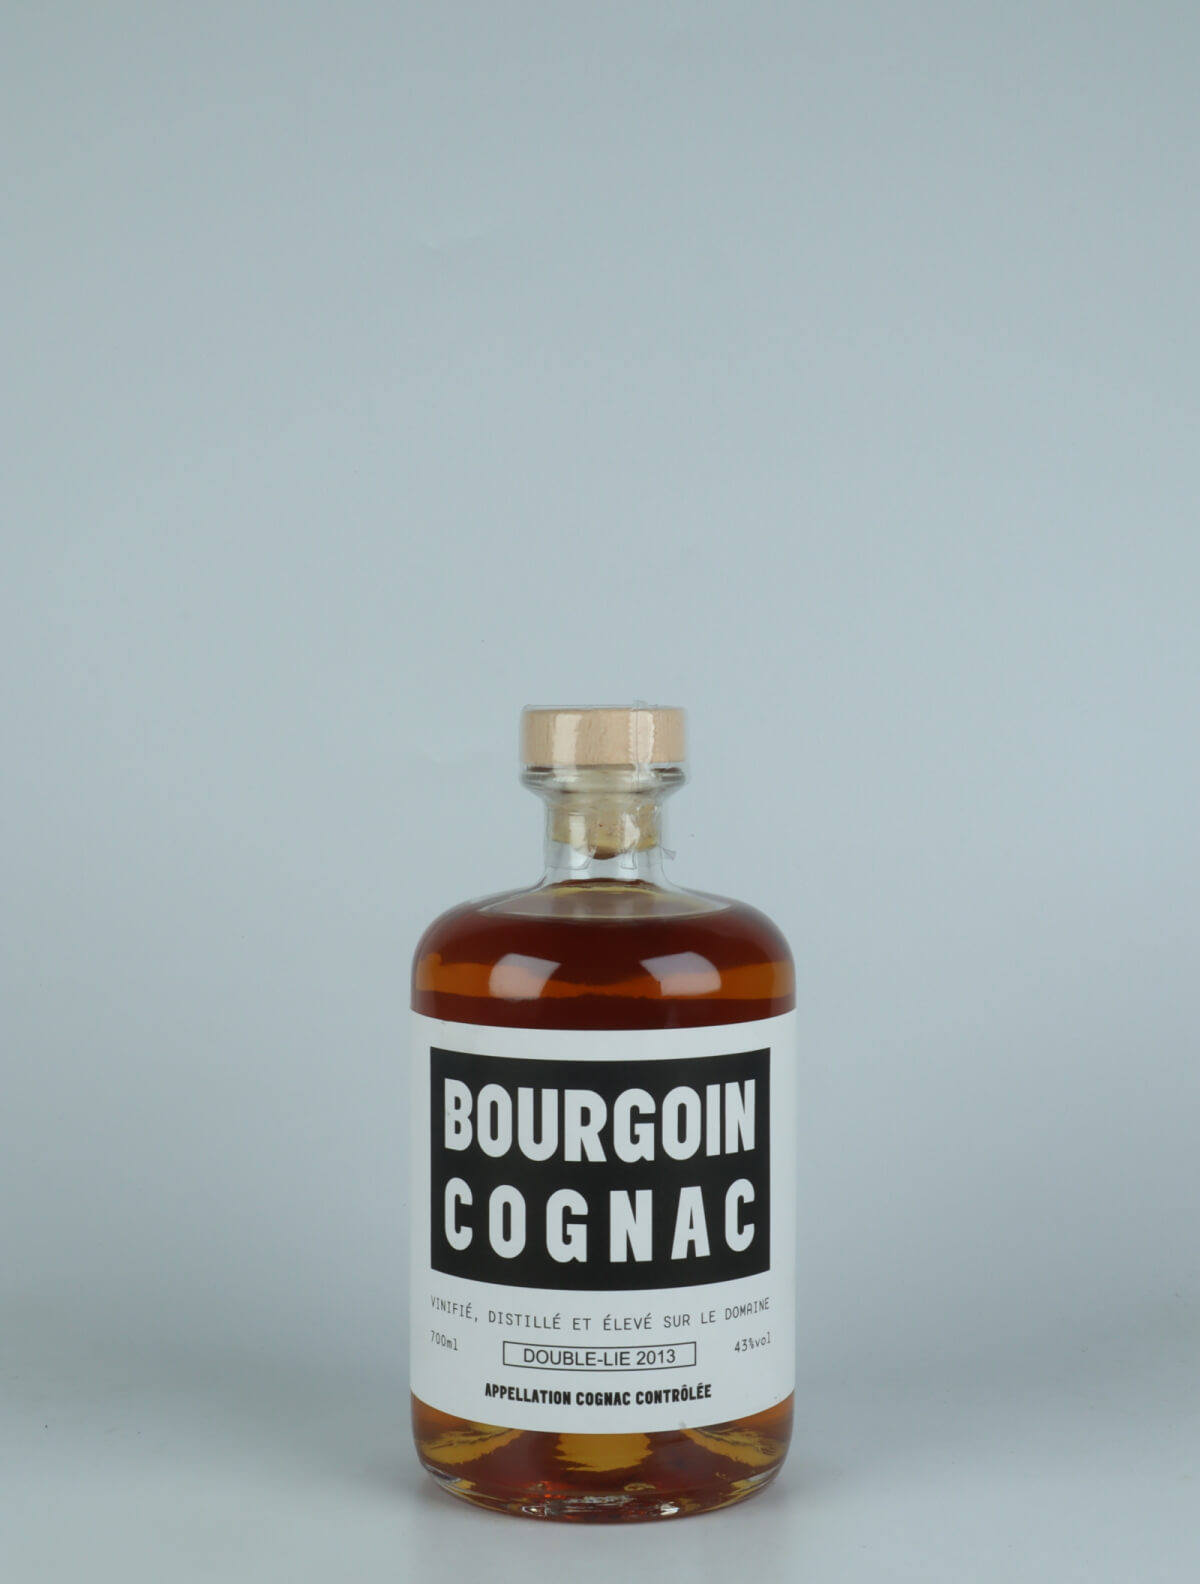 A bottle N.V. Cognac XO - Double Lie - 10 Years Old (2013) Spirits from Bourgoin Cognac, Cognac in France